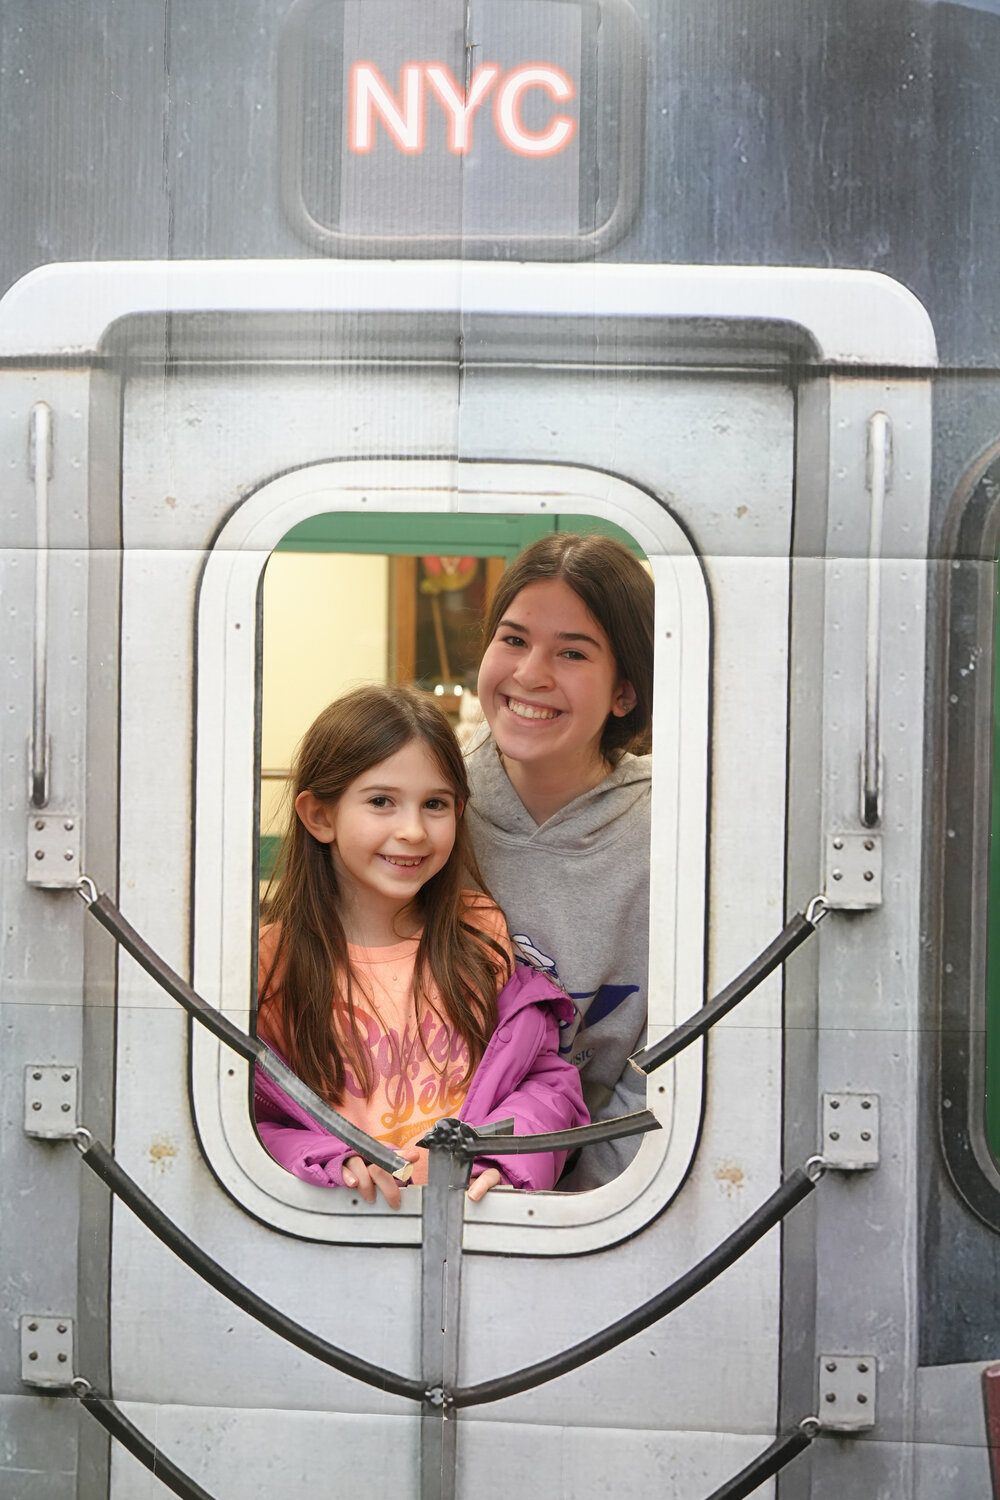 Amelia Faynberg, a second-grader at Hewlett Elementary School with her sister Rebecca Faynberg, a Hewlett High junior, take a ‘ride’ on the city subway.